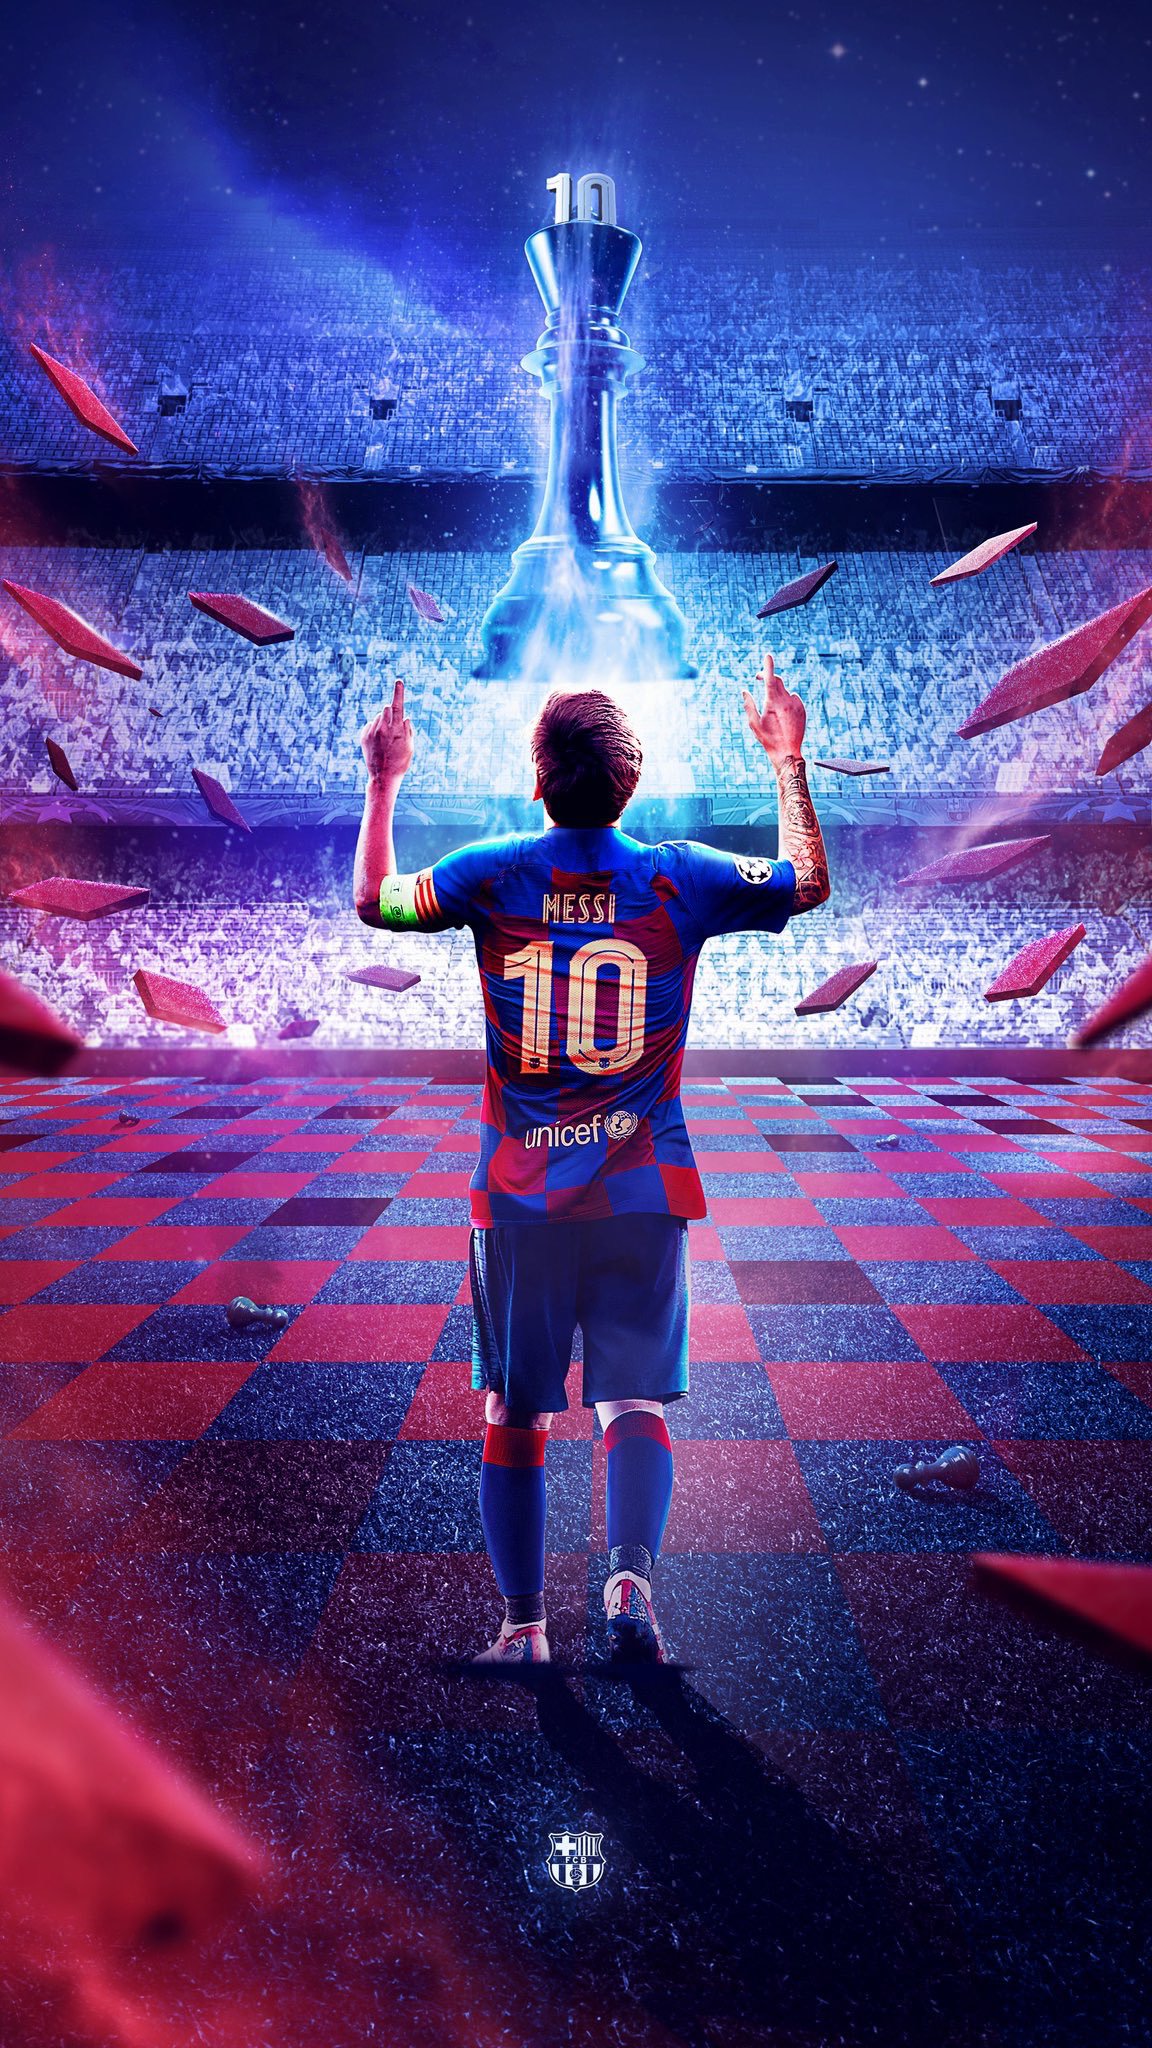 Messi Cool Wallpaper - KoLPaPer - Awesome Free HD Wallpapers